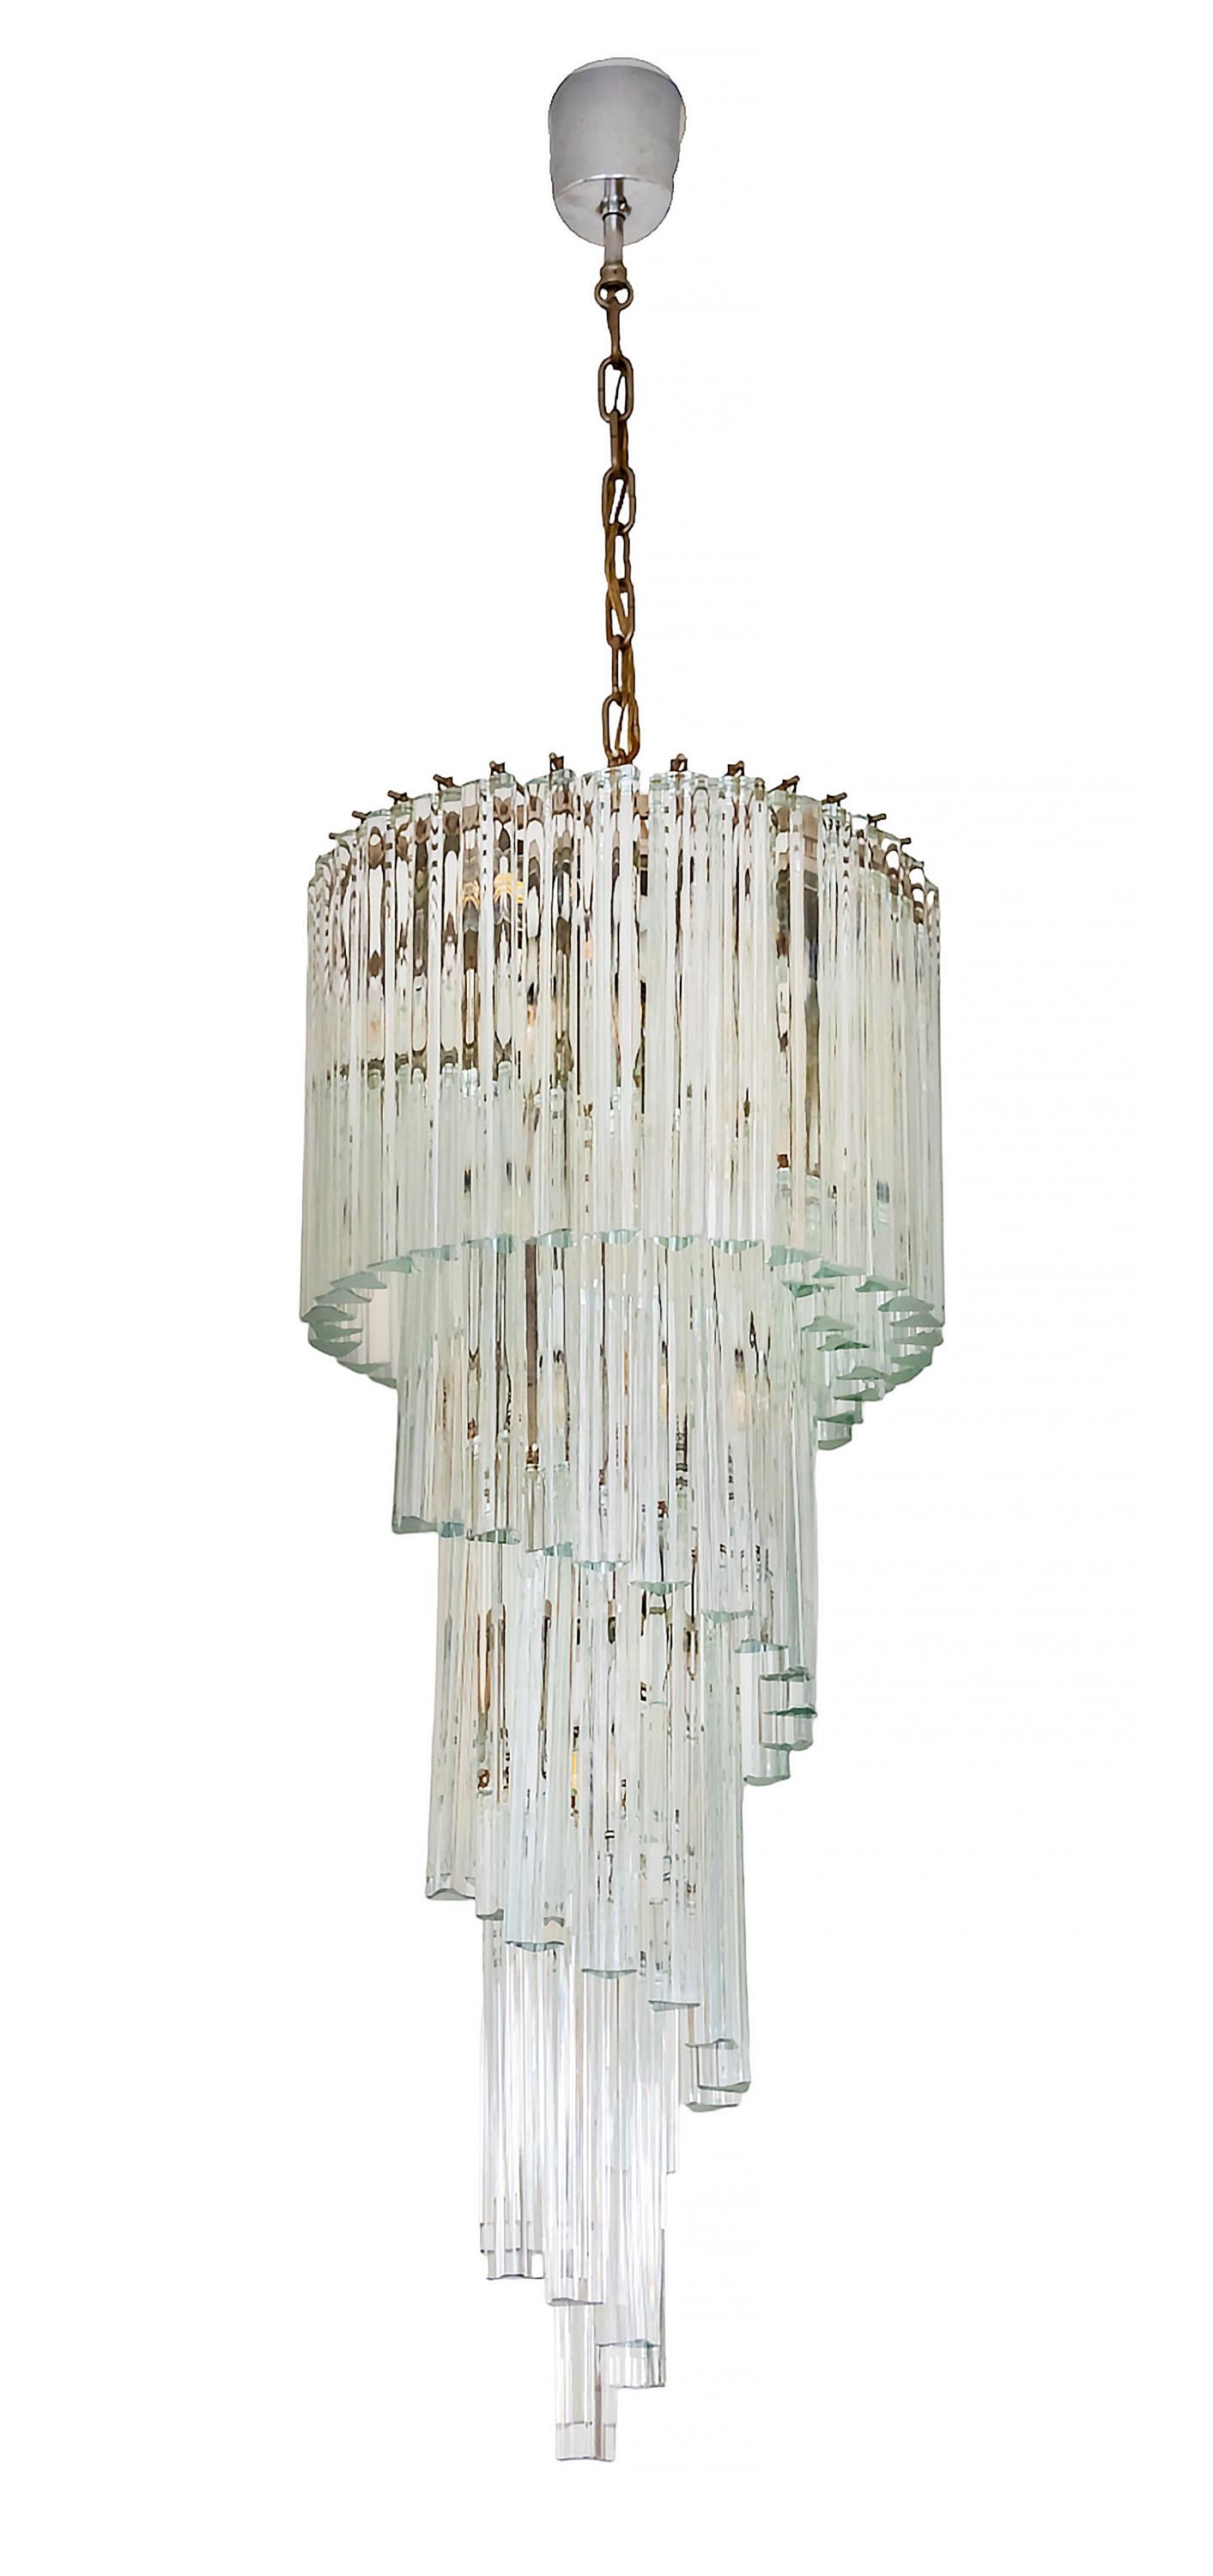 Italian chandelier is made of solid clear Murano glass.
The design is spiral form with triangular glass details mounted on metal framework.
It is very heavy.
Total height: 152 cm
Height without chain: 100 cm
Diameter: 40 cm
Very good vintage